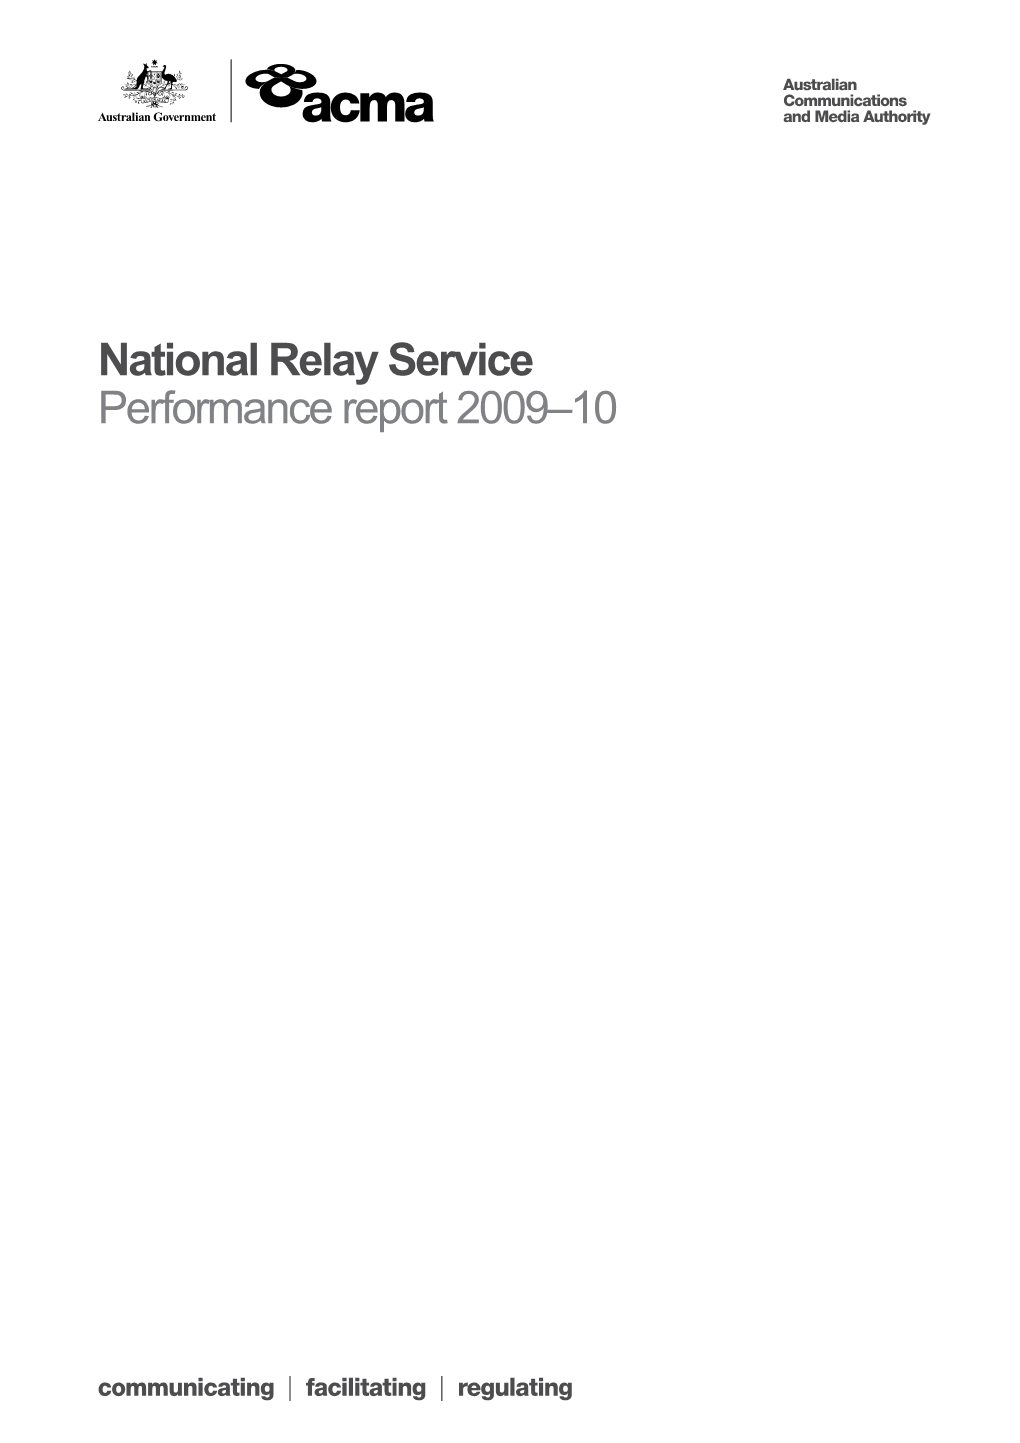 National Relay Service Performance Report 2009 10